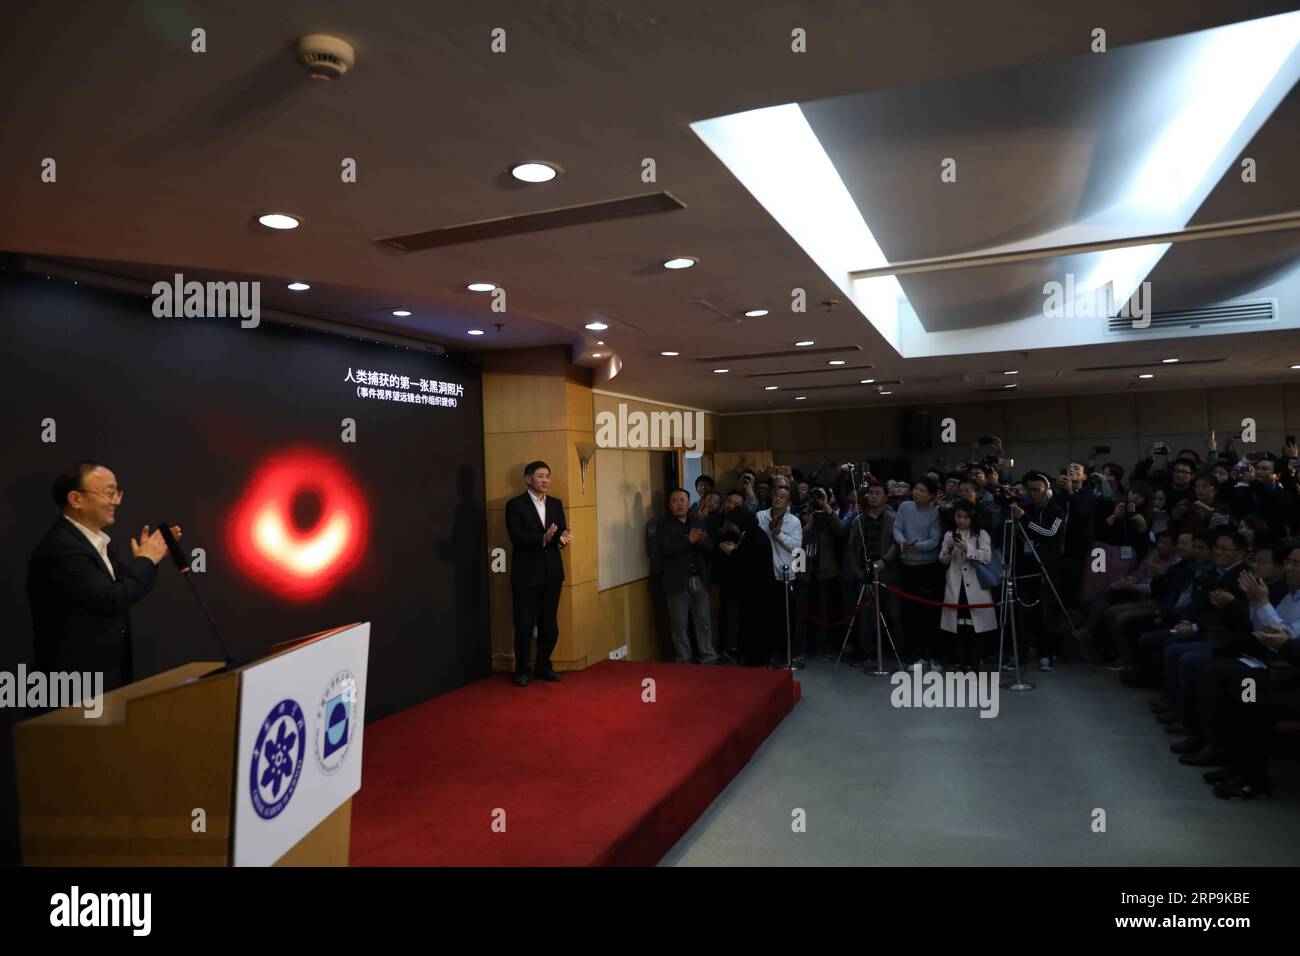 (190410) -- SHANGHAI, April 10, 2019 (Xinhua) -- Shanghai Astronomical Observatory (SAO) holds a press conference to release the first-ever image of a supermassive black hole at the heart of the distant galaxy M87, in east China s Shanghai, April 10, 2019. The image of the black hole, based on observations through the Event Horizon Telescope (EHT), a planet-scale array of eight ground-based radio telescopes forged through international collaboration, was unveiled in coordinated press conferences across the globe at around 9:00 p.m. (Beijing time) on Wednesday. The landmark result offers scient Stock Photo